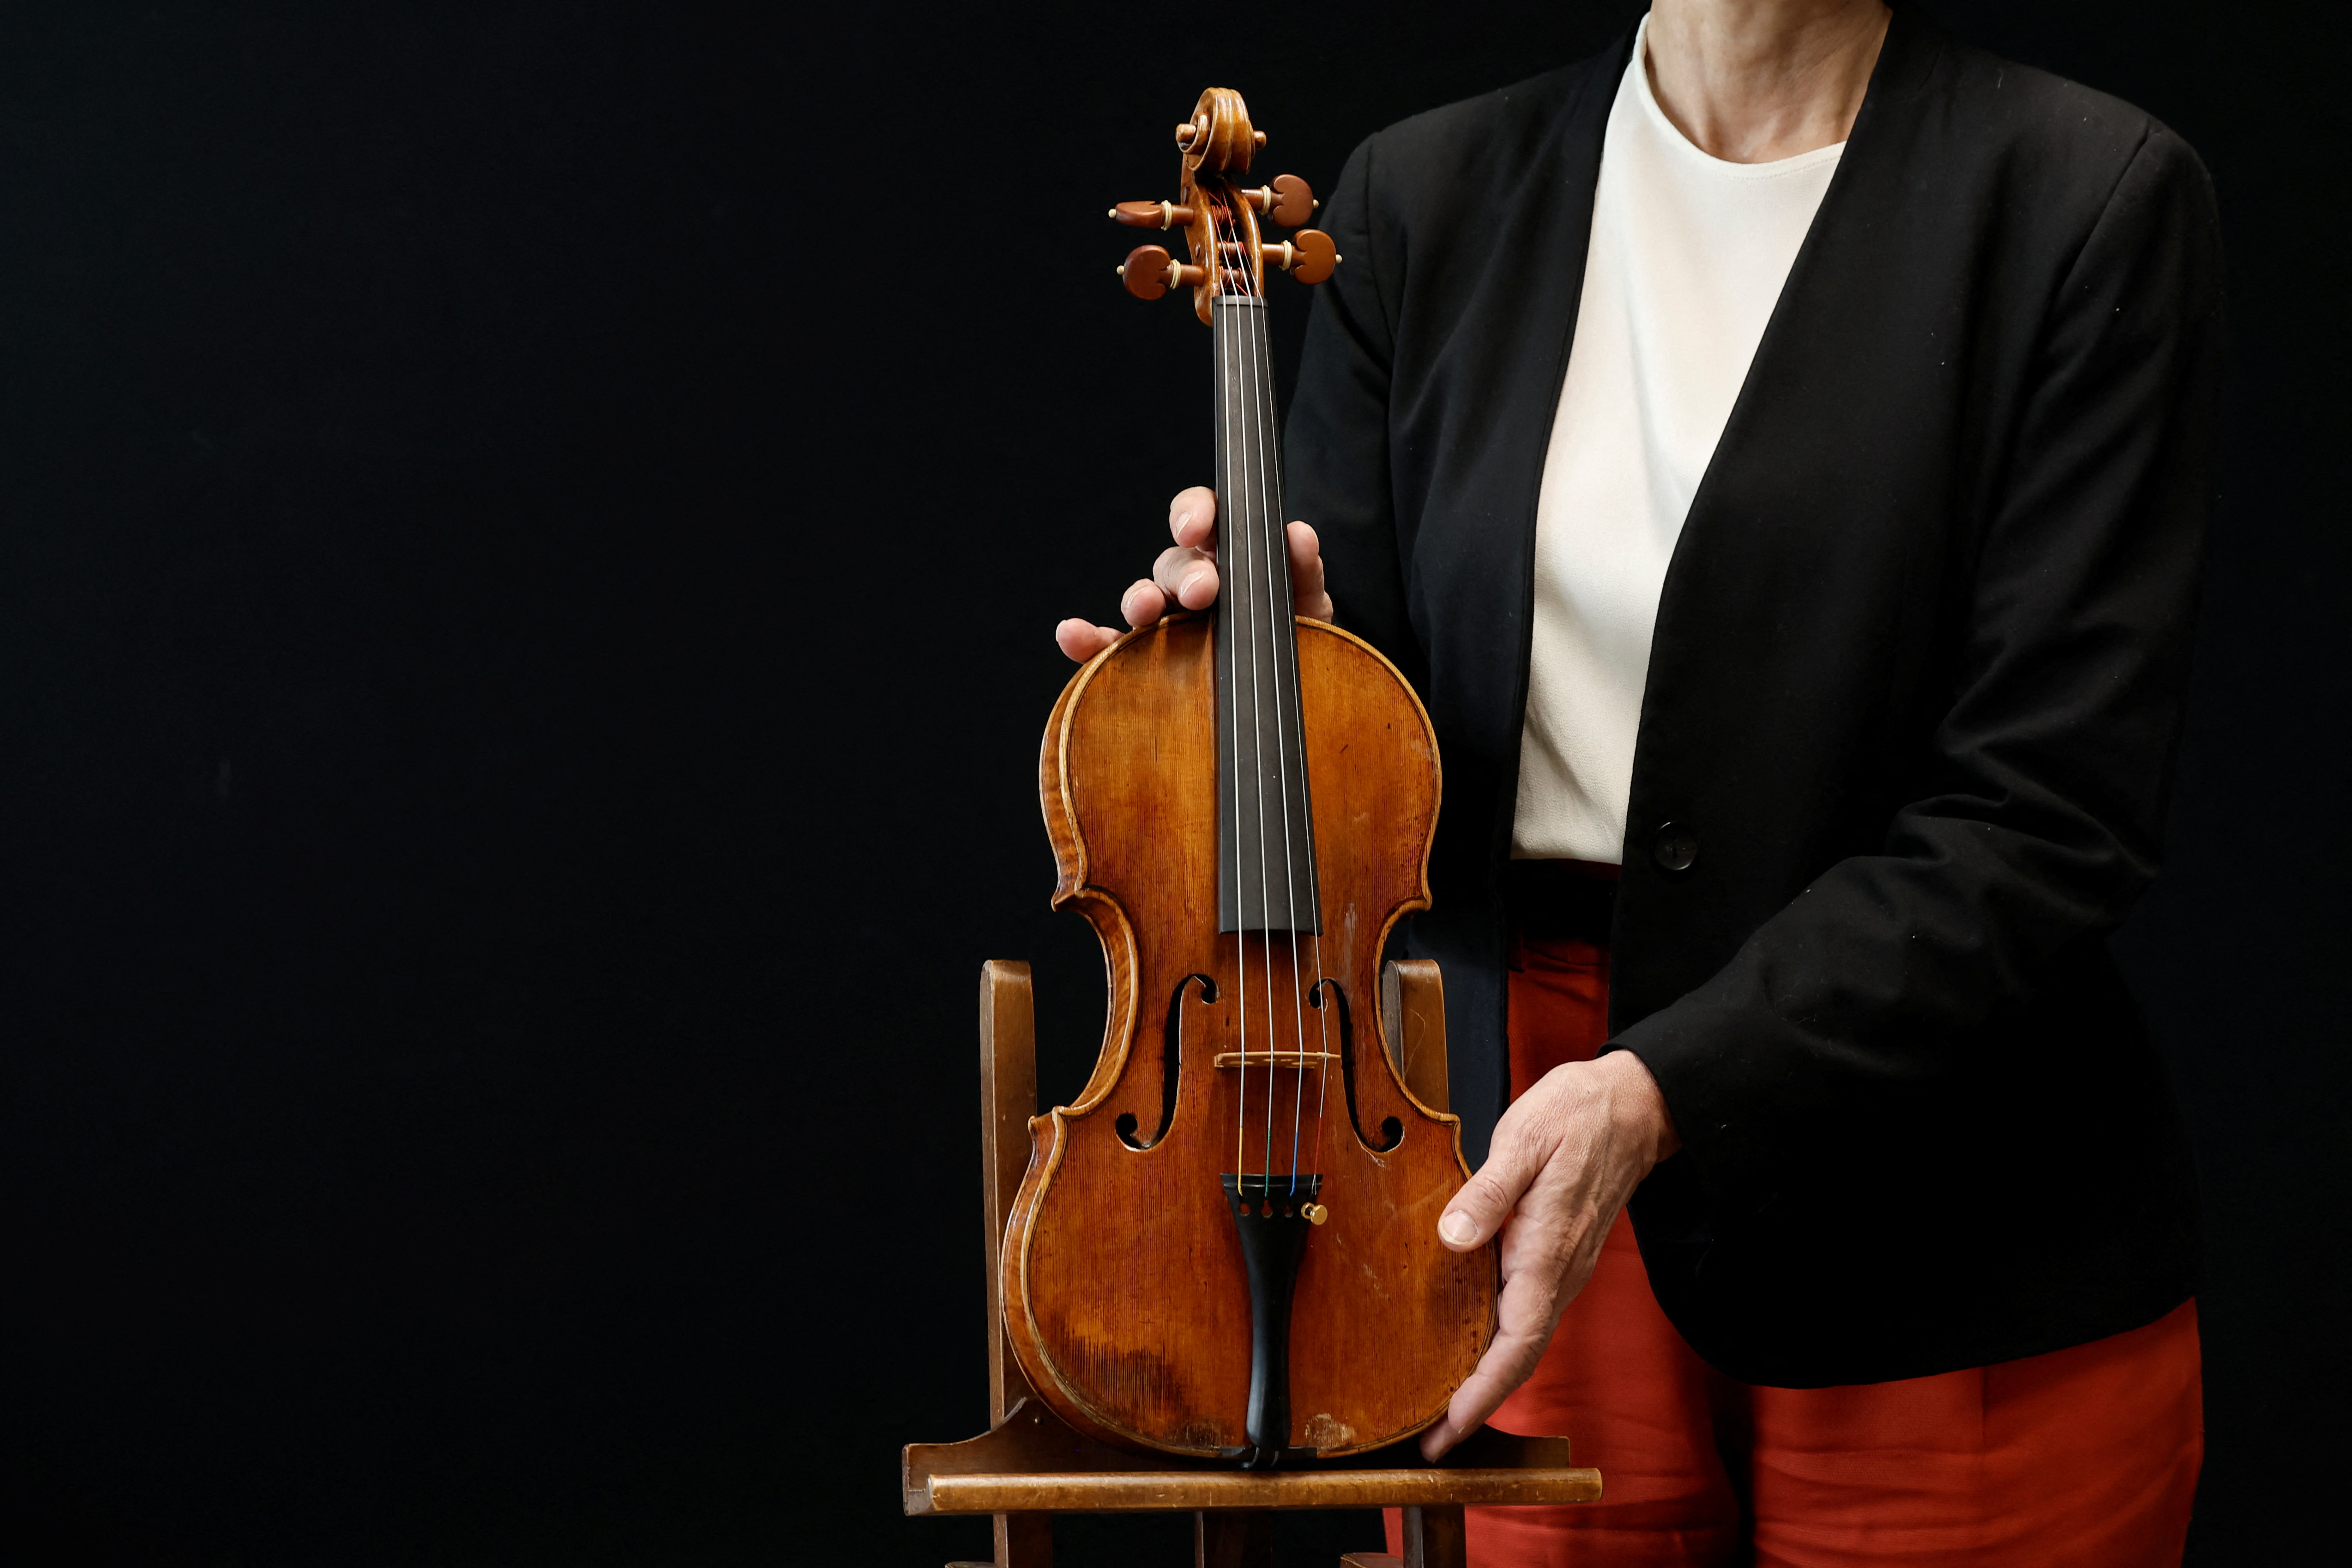 300-year-old violin to be auctioned in Paris